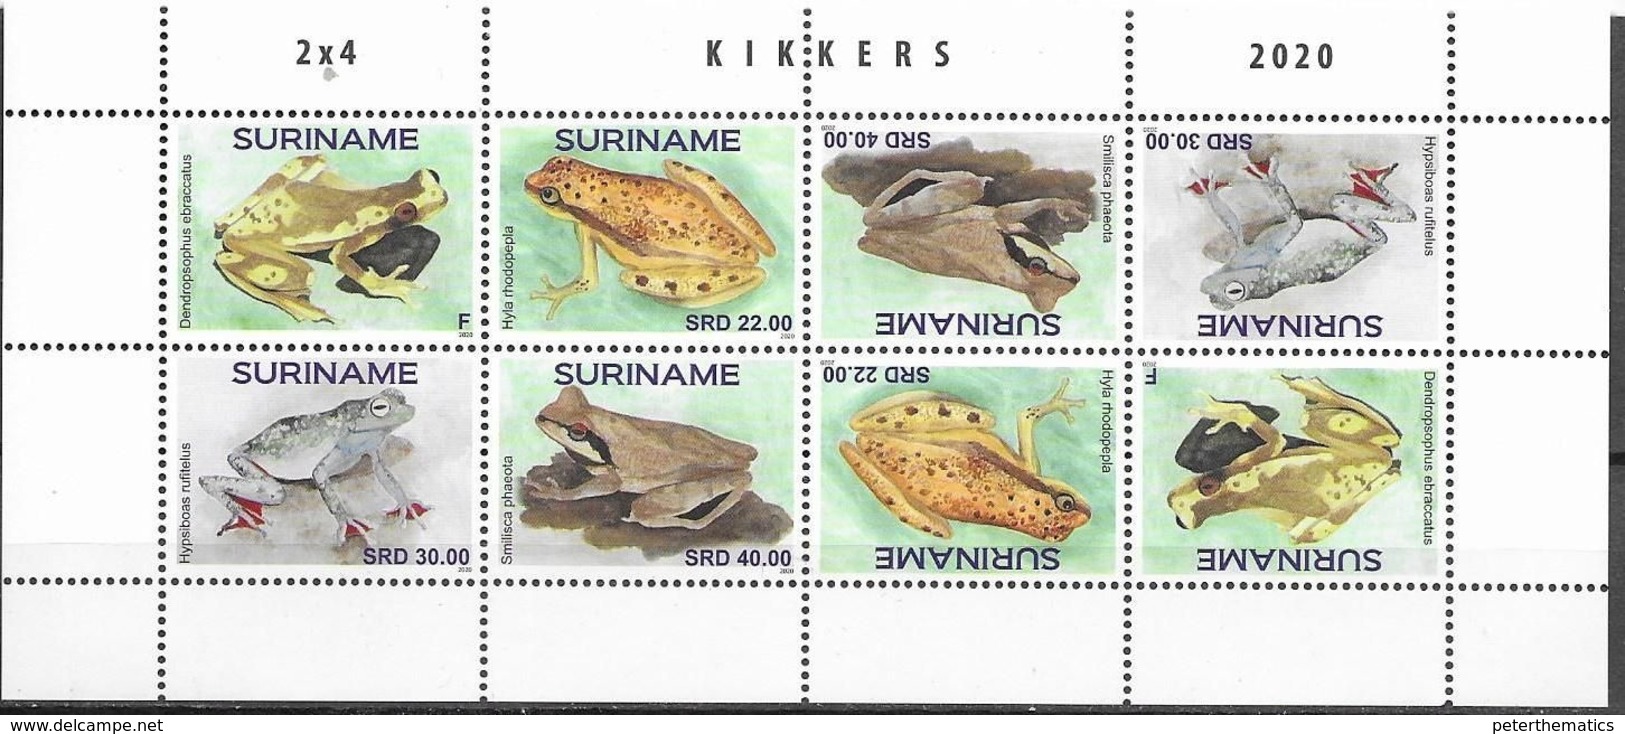 SURINAME, 2020, MNH, FROGS, SHEETLET OF 2 SETS - Frogs